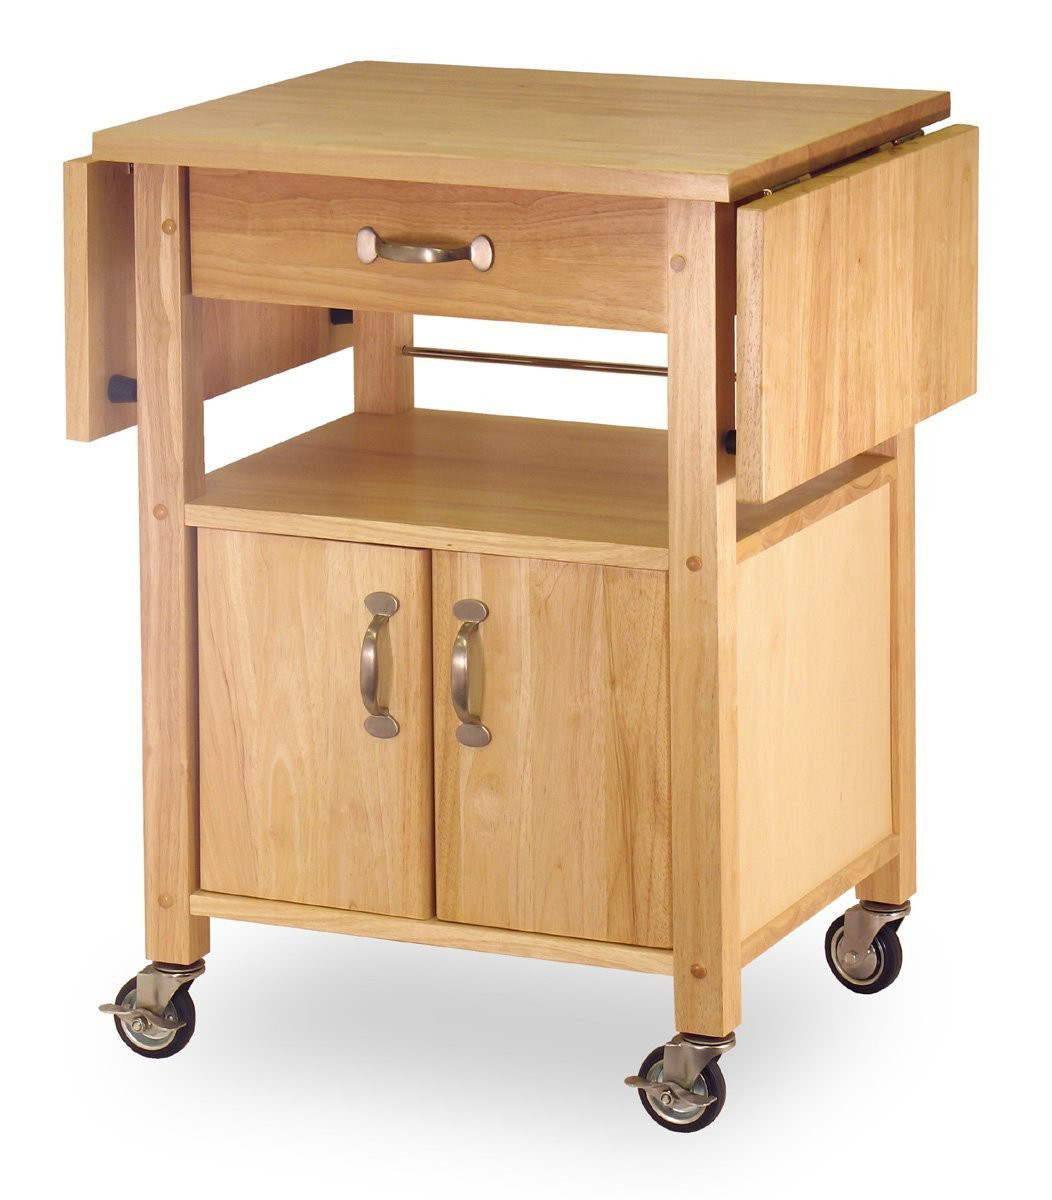 Small Rolling Kitchen Cart
 5 Best Winsome Wood Kitchen Carts – Nice choice for a